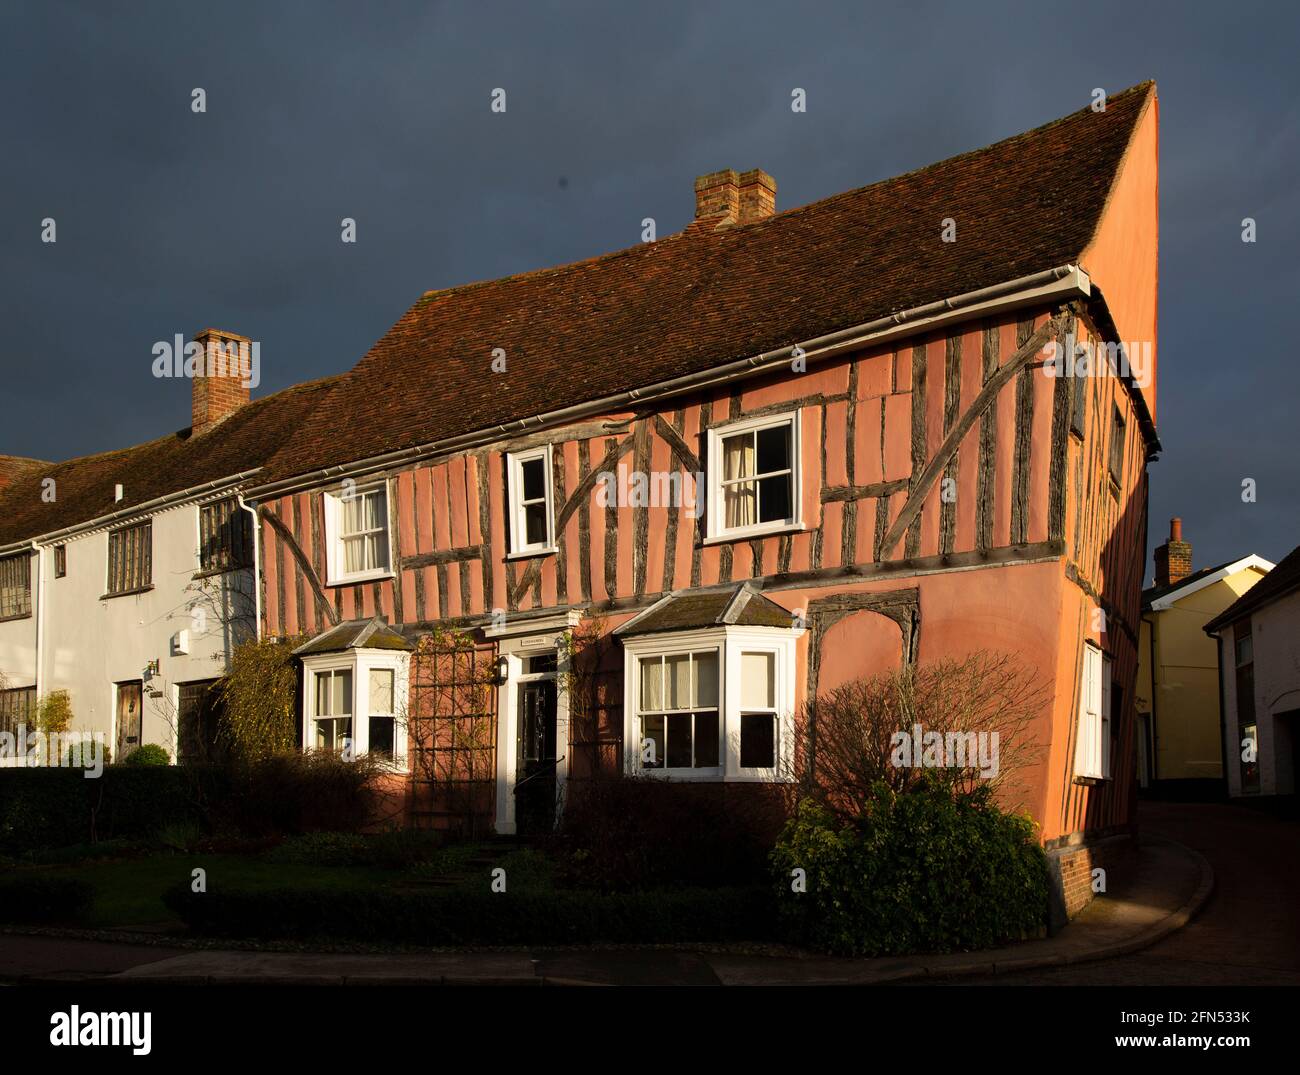 Late afternoon sunlight hits an historic half-timbered house in Lavenham, Suffolk. With storm clouds in the background. Stock Photo